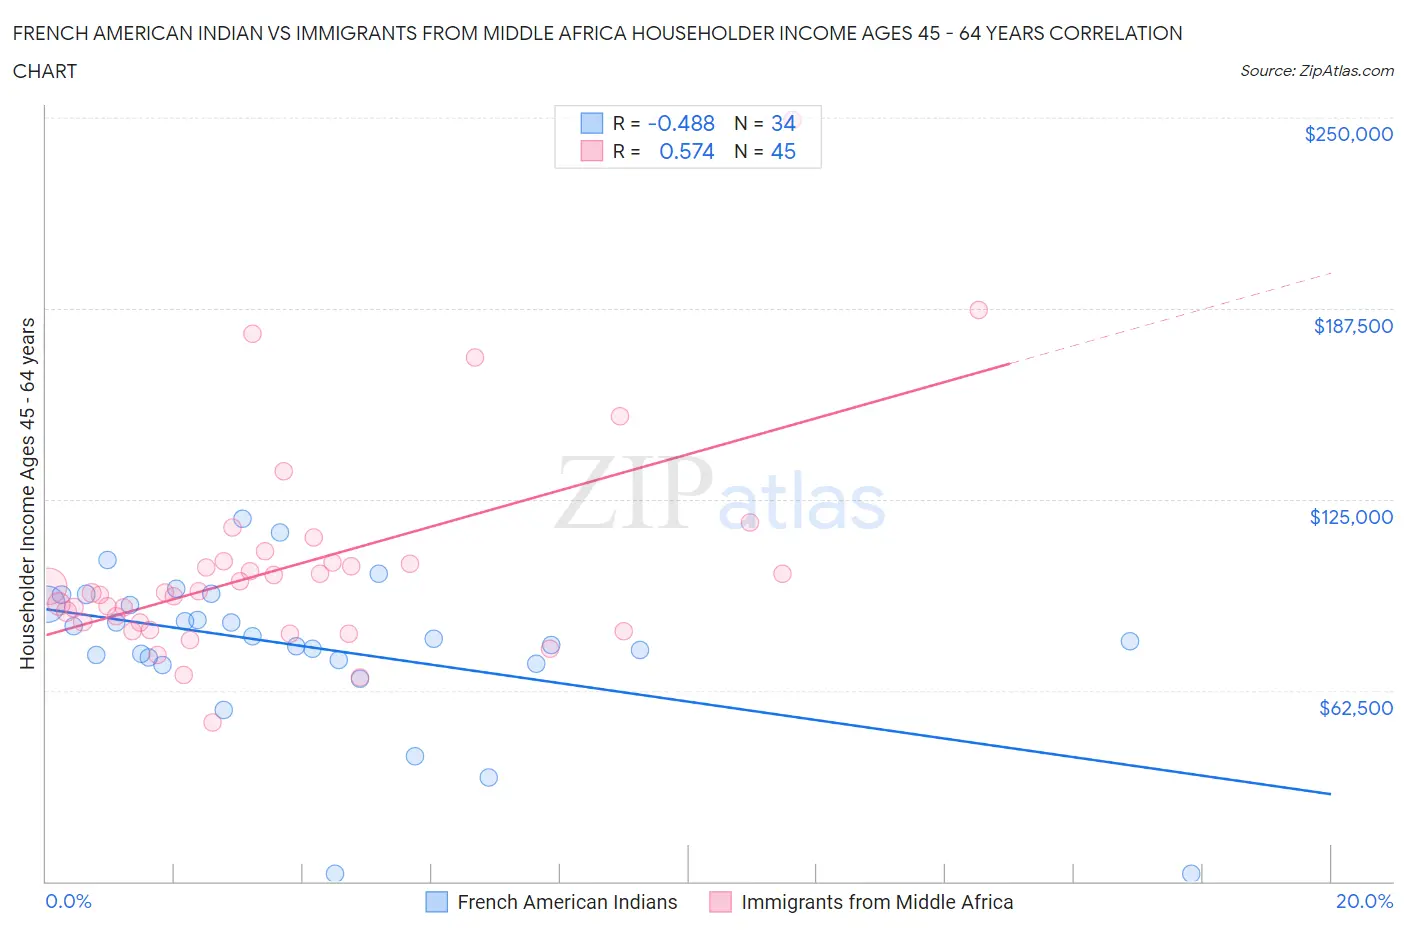 French American Indian vs Immigrants from Middle Africa Householder Income Ages 45 - 64 years